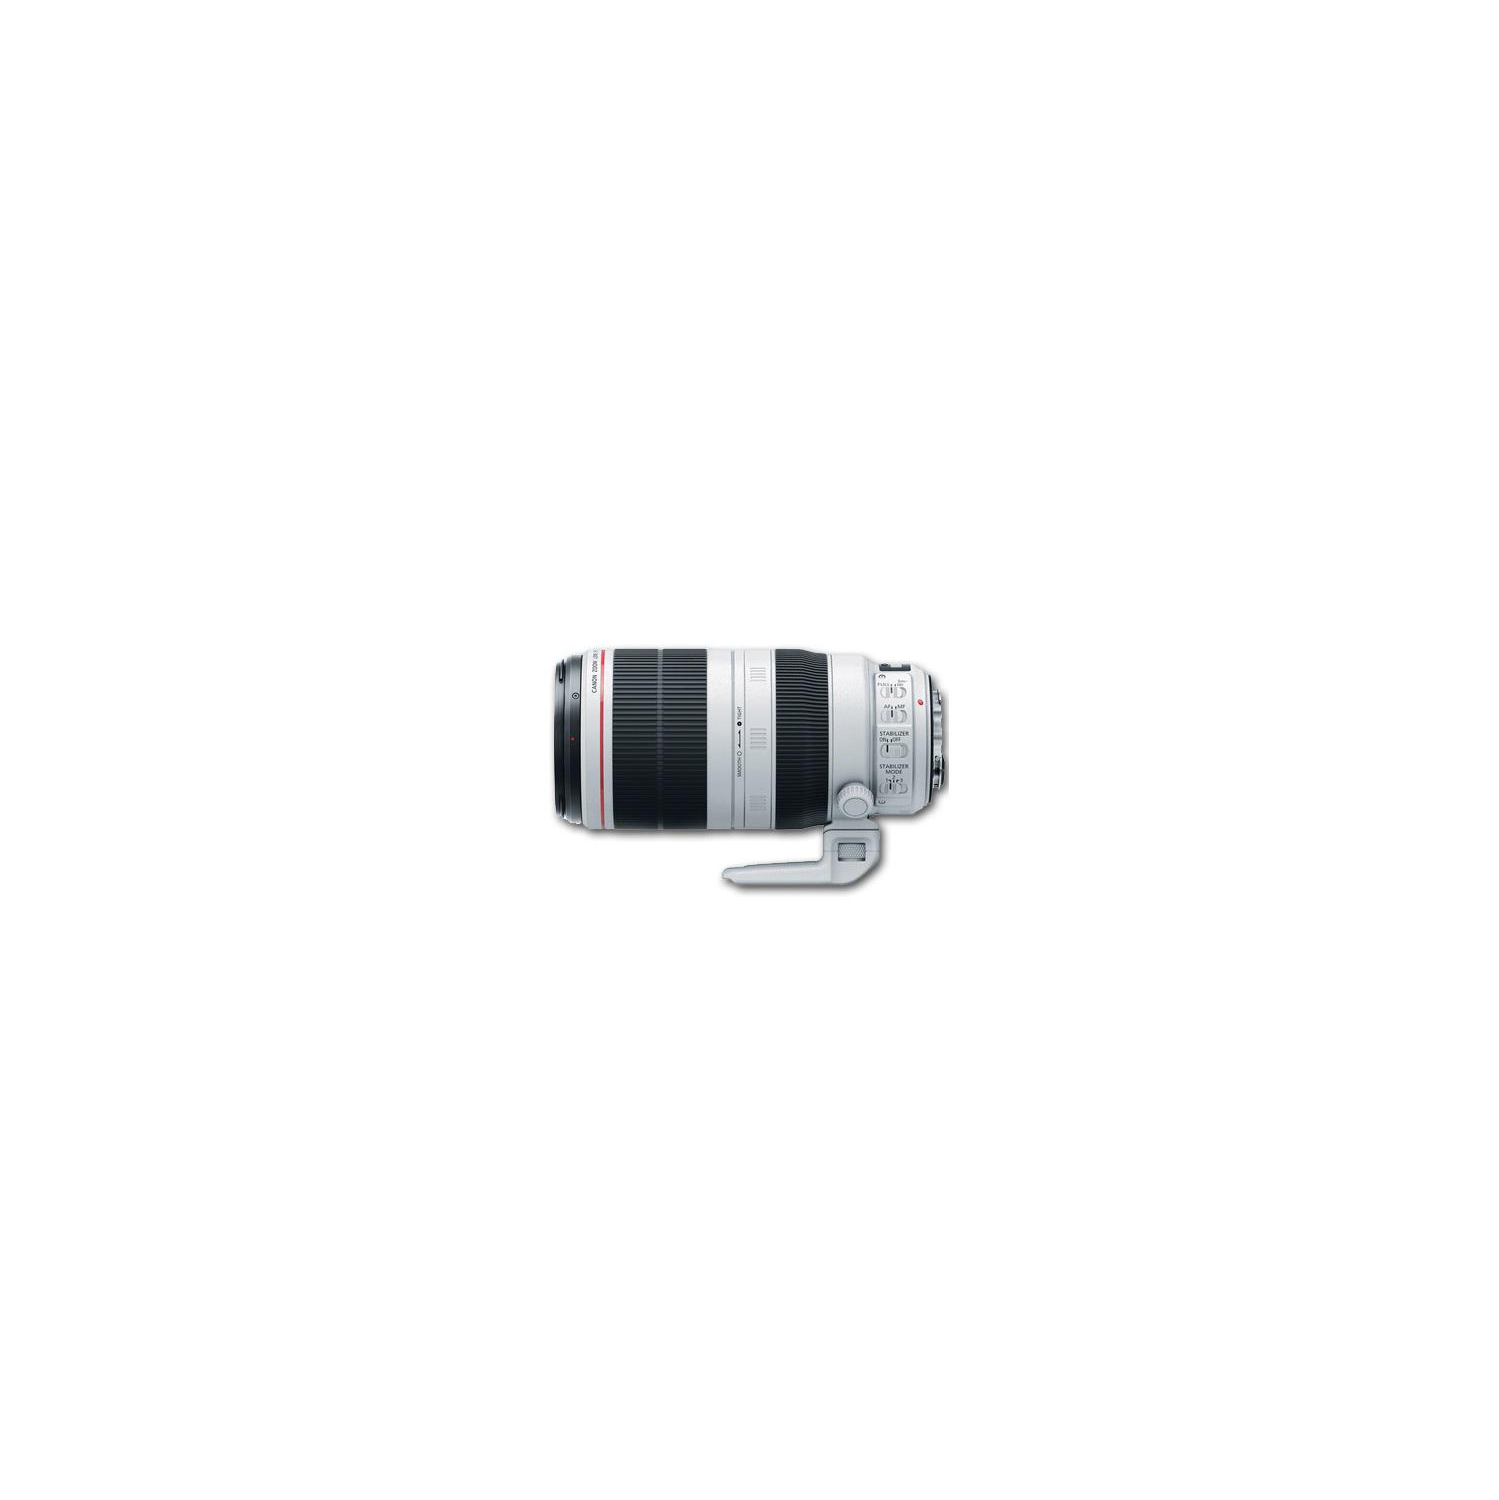 Canon 100-400mm f4.5-5.6L IS II EF USM Lens | Best Buy Canada